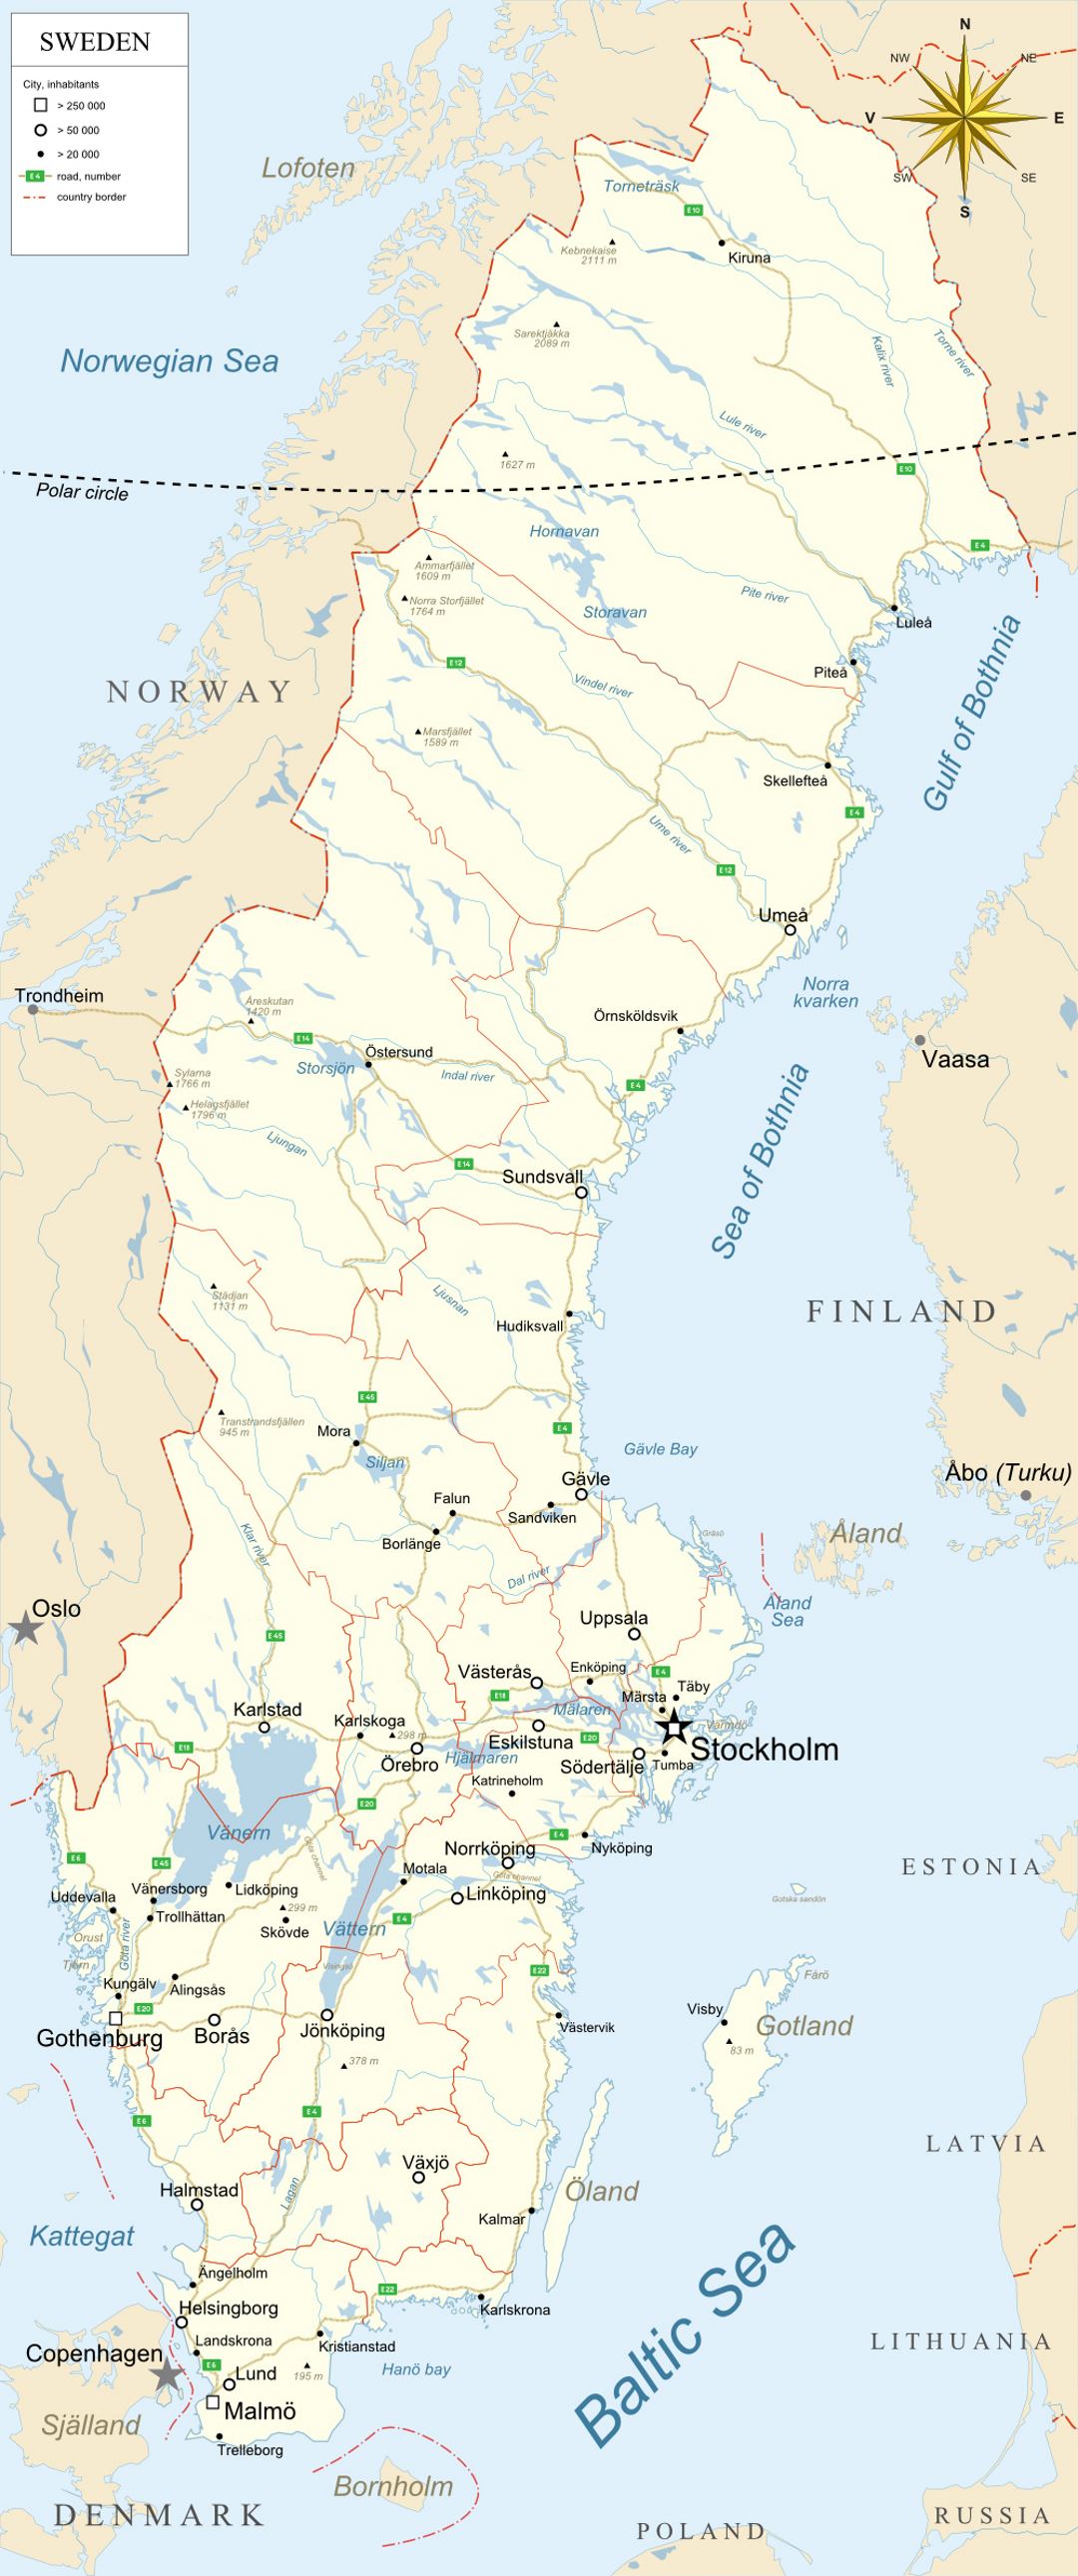 Large map of Sweden with administrative divisions, roads and major cities